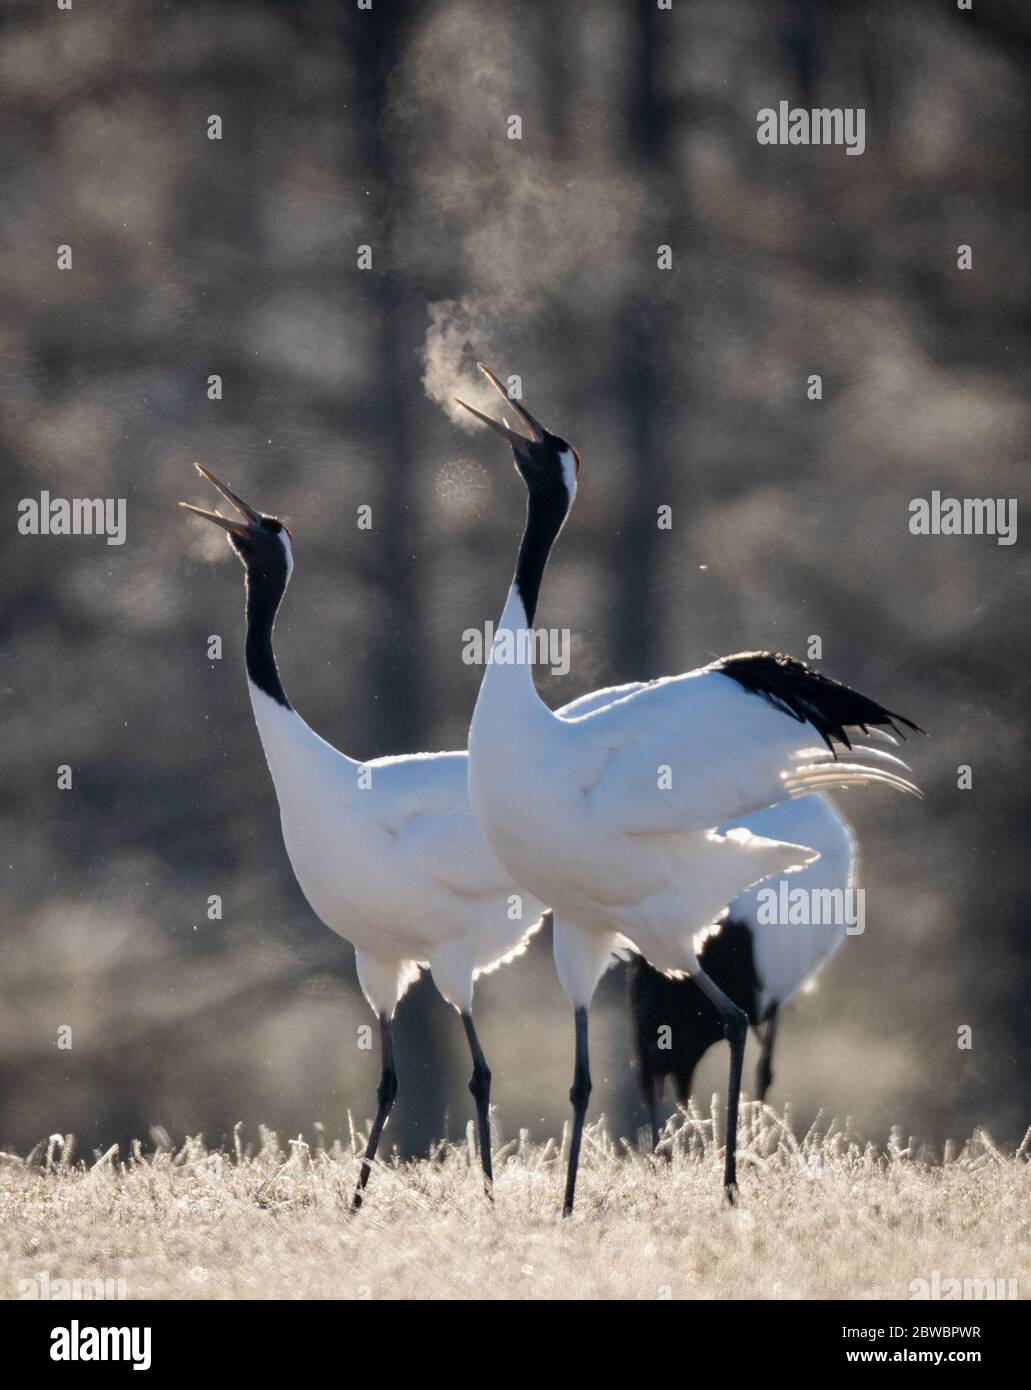 Two red-crowned cranes dancing ritual marriage dance and breathing in cold at Tsurui Ito Tancho Crane Sanctuary in Hokkaido, Japan Stock Photo